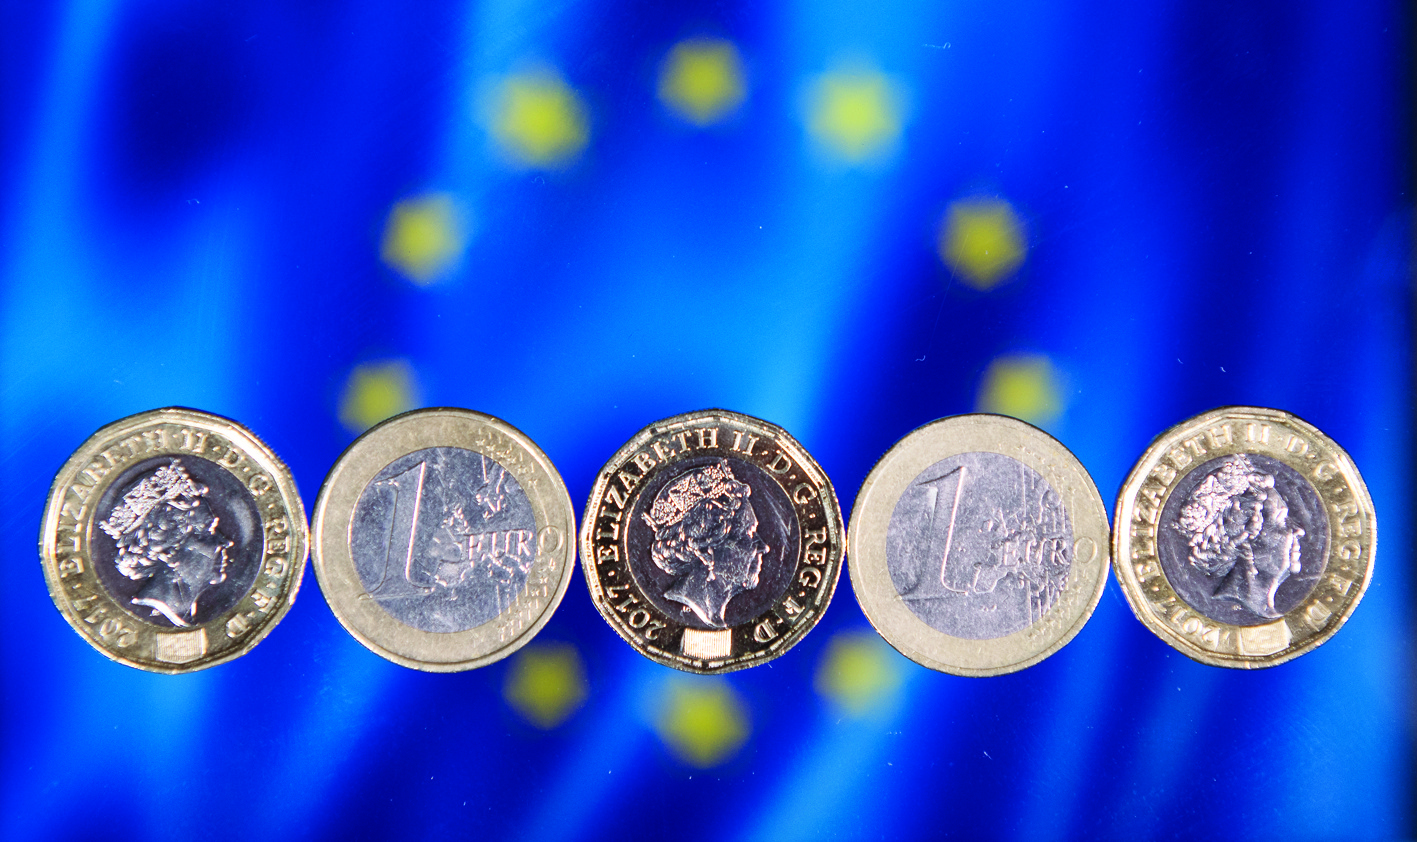 (FILES) In this file photo taken on December 14, 2017 British one pound sterling coins and one Euro coins are arranged in front of the European Union flag in a photograph in London on December 14, 2017. - The pound slumped more than one percent against the dollar and euro on on December 7, 2020 with post-Brexit trade talks between Britain and the European Union on a knife-edge. (Photo by Justin TALLIS / AFP)